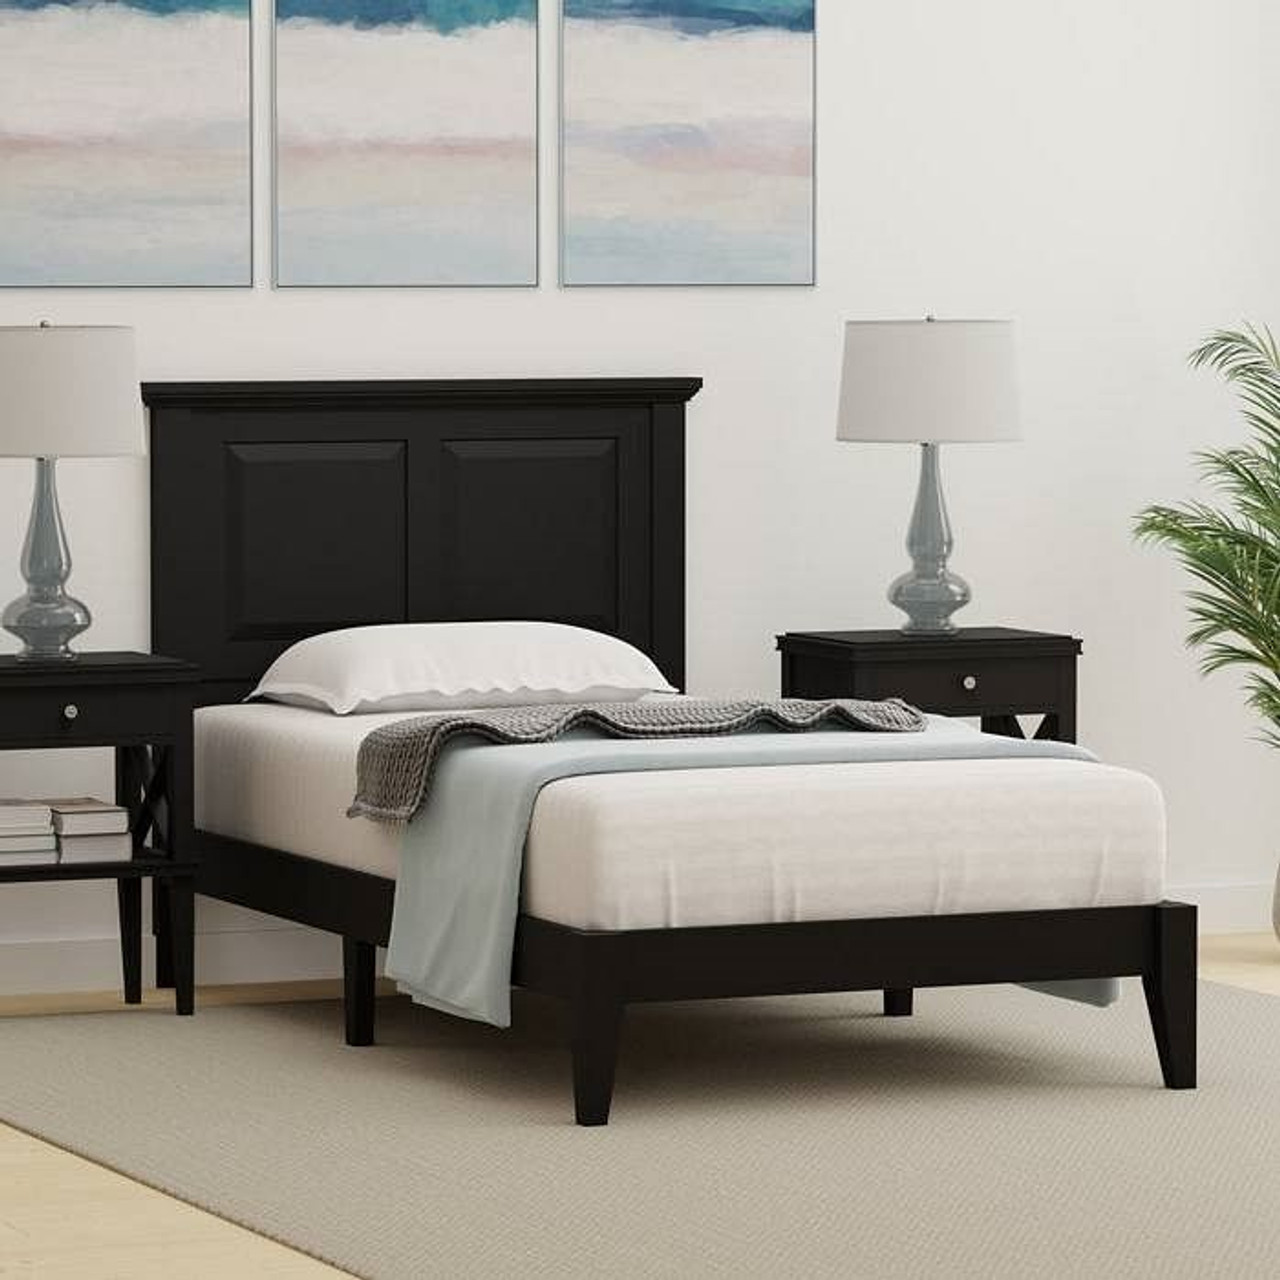 Twin Traditional Solid Oak Wooden Platform Bed Frame with Headboard in Black